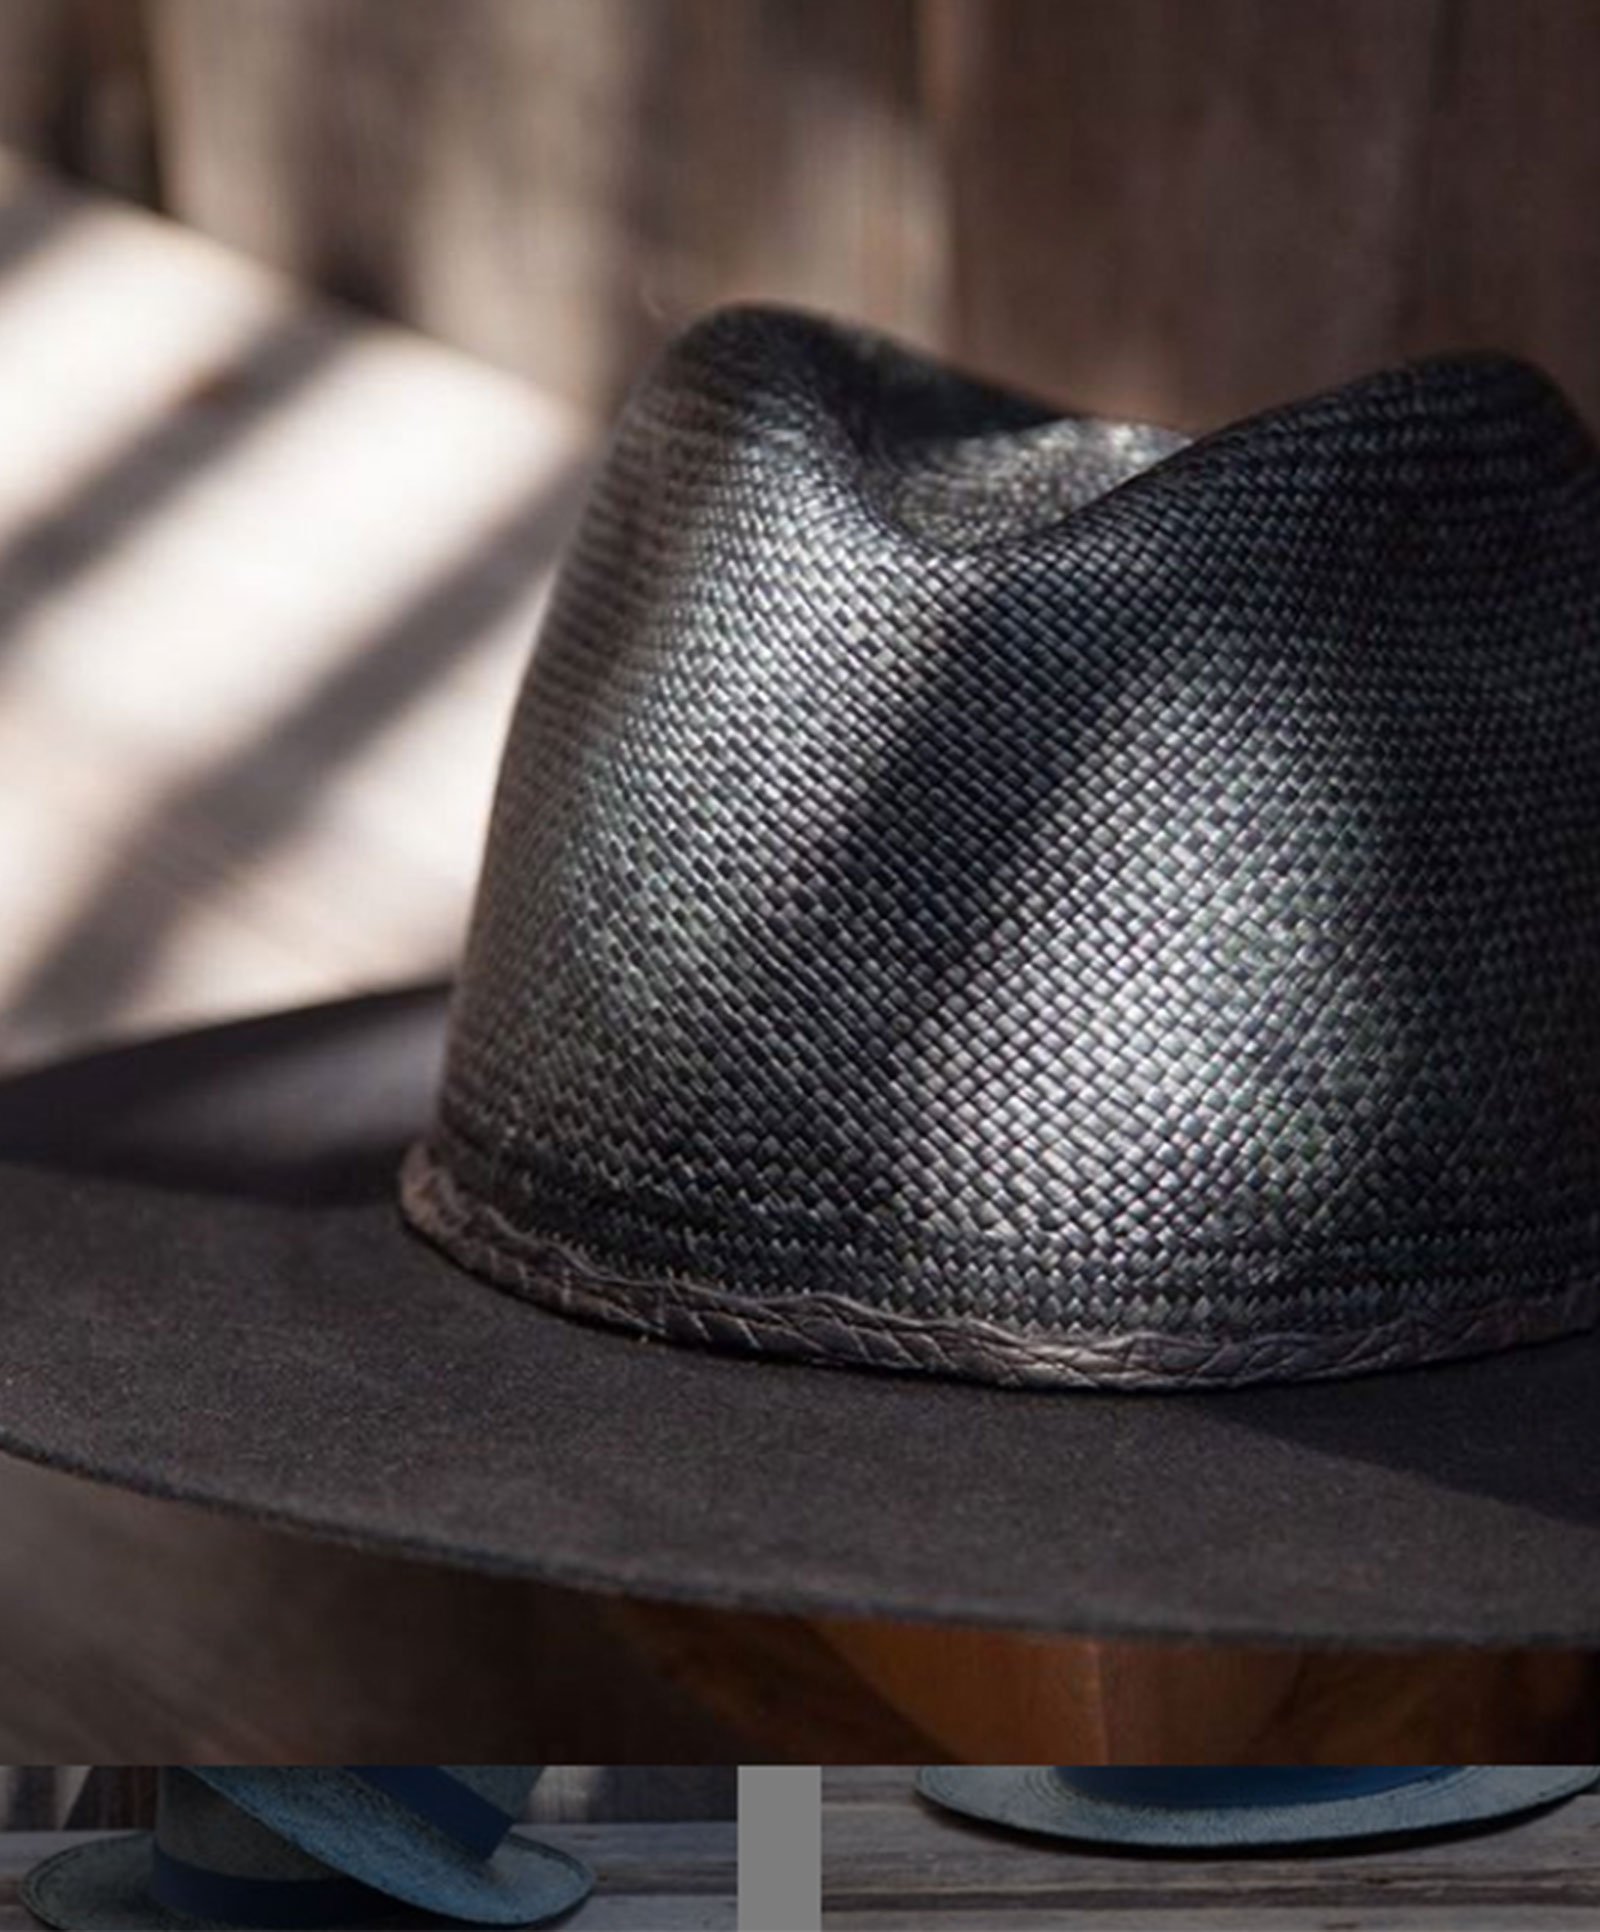 Design
The 3 shades of black. Black Cuenca Brisa weave, black Beaver Felt, and Black Croc Band. Black on Black on Black.
Material
Cuenca Brisa weave crown, 100% Western Beaver Fur Felt sustainably acquired for the brim, and Croc band.
Specifications
C semi teardrop 4 crown with a 3 1/4 Beaver Felt brim. Handmade in our atelier in NYC. Please allow 6-8 weeks to custom make this special piece.